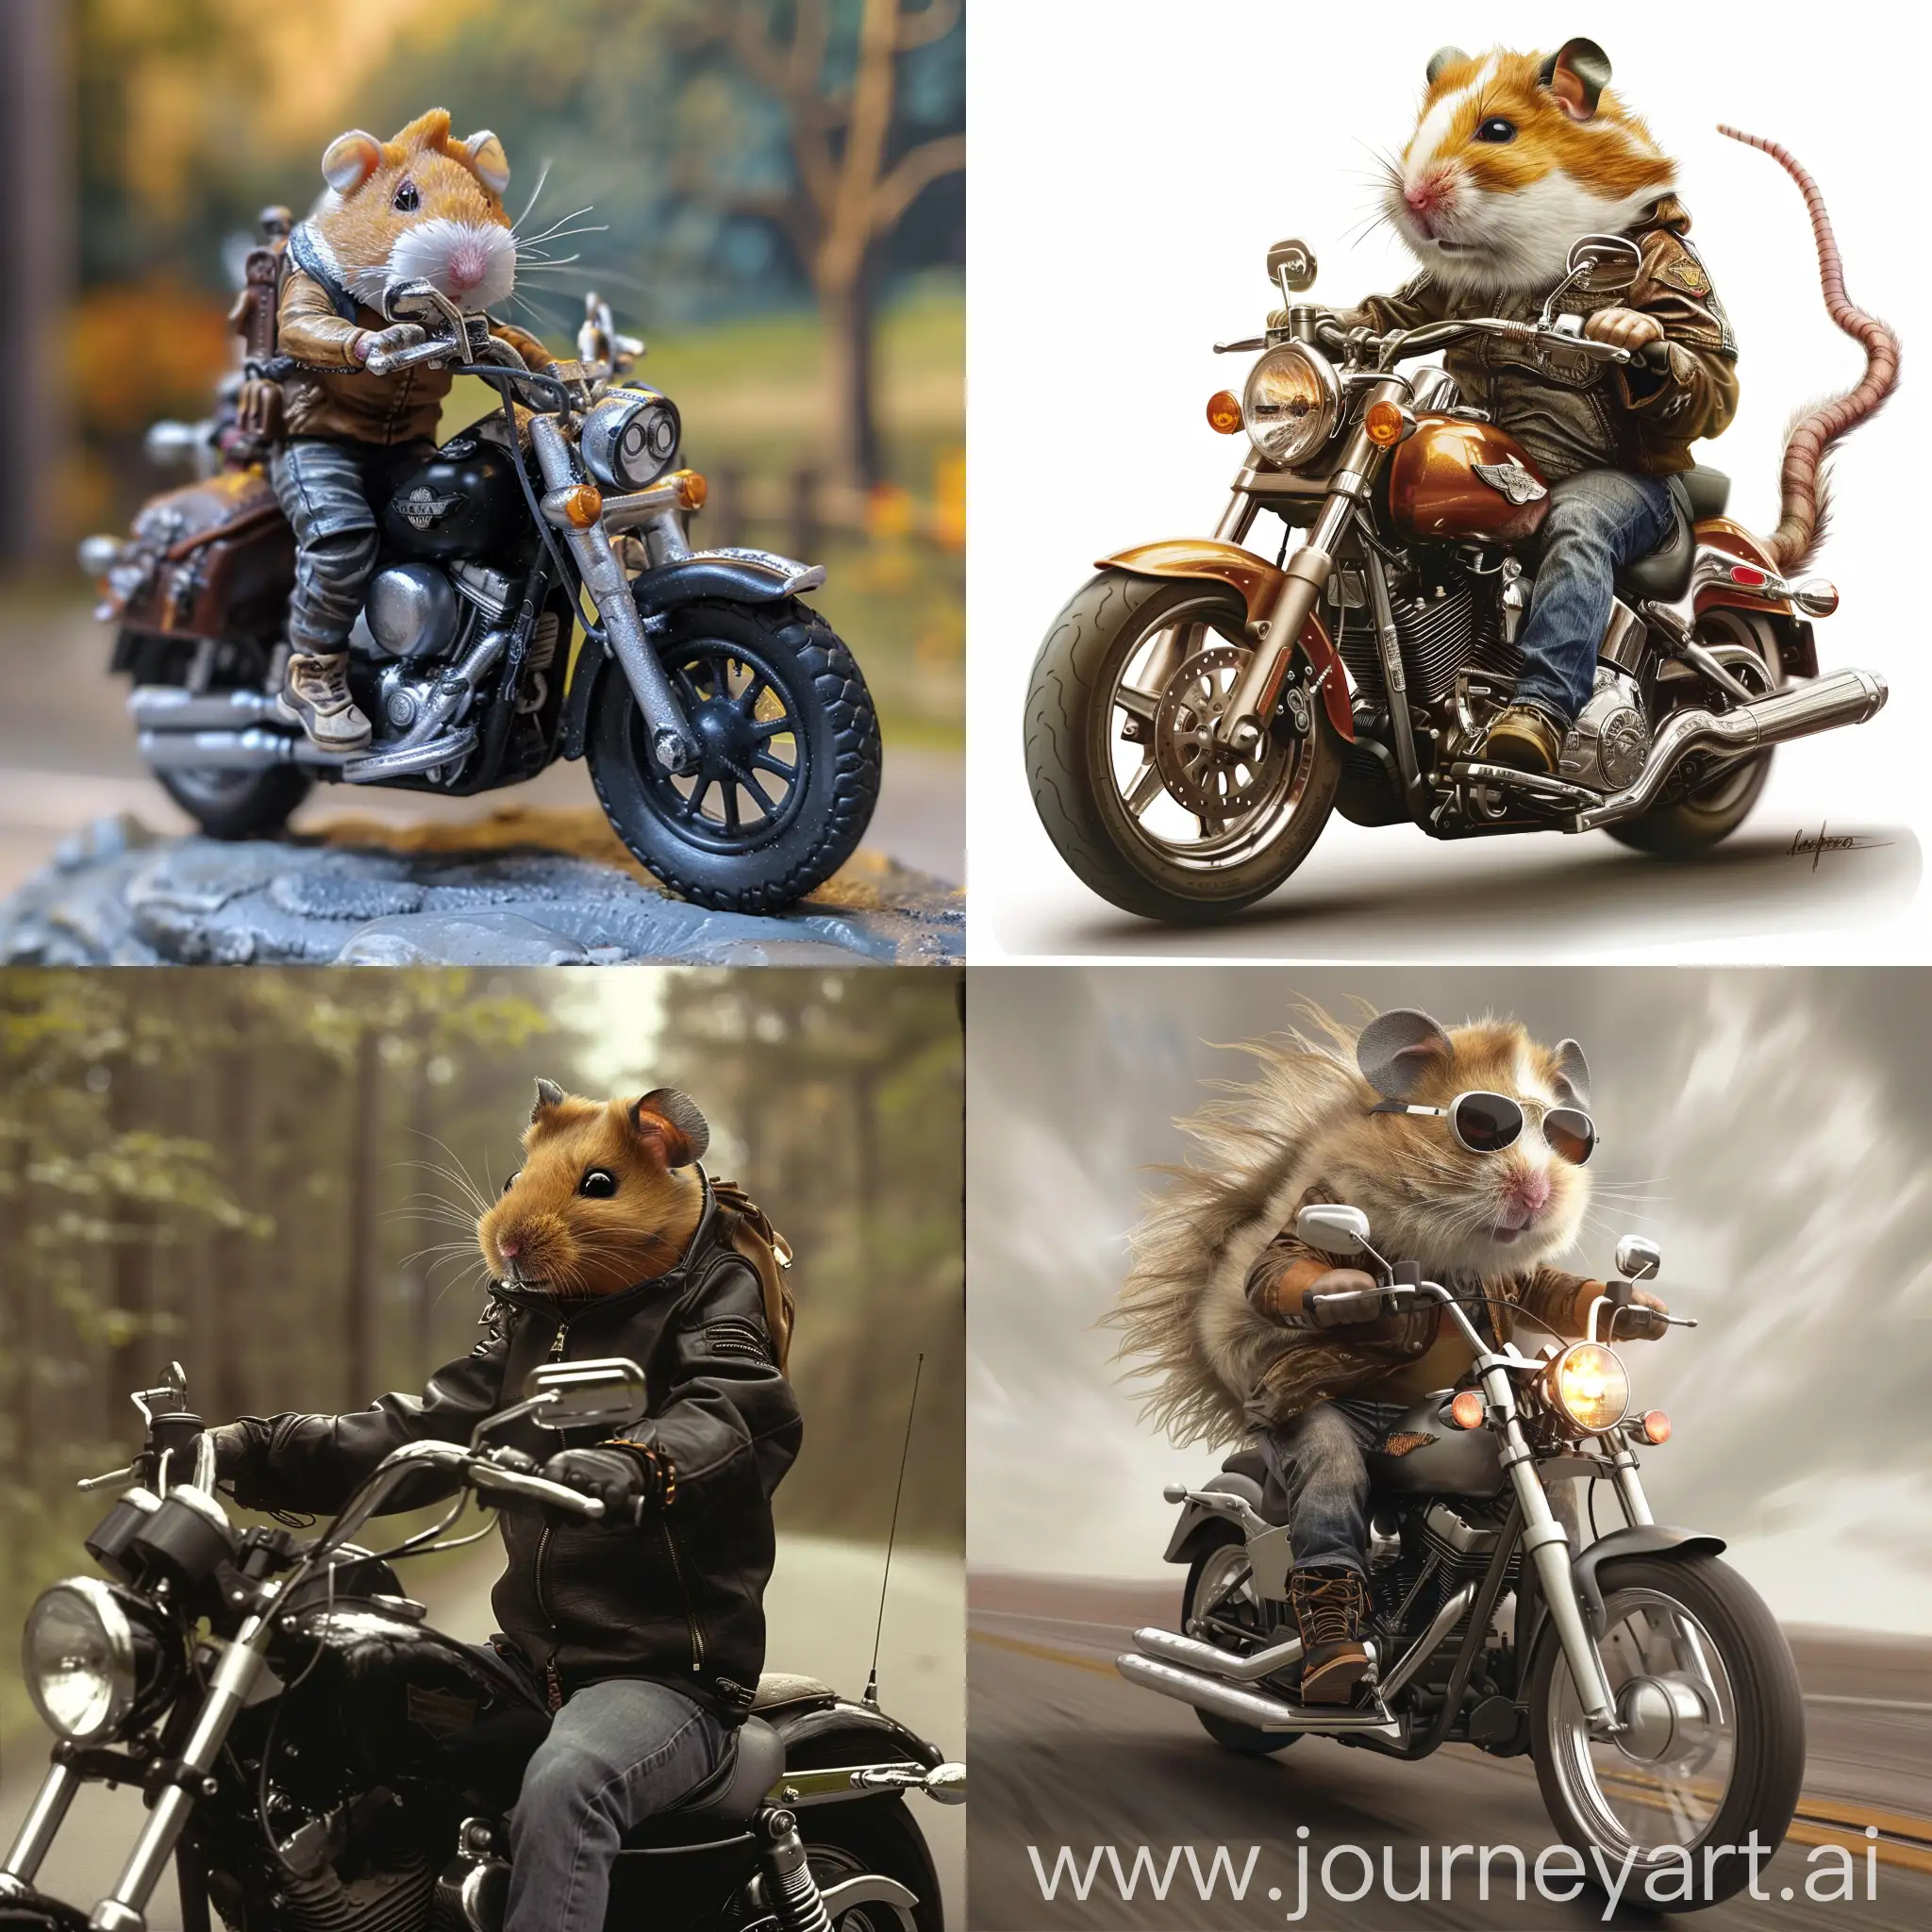 Tuttle-with-Hamster-Head-Riding-Harley-Davidson-Motorcycle